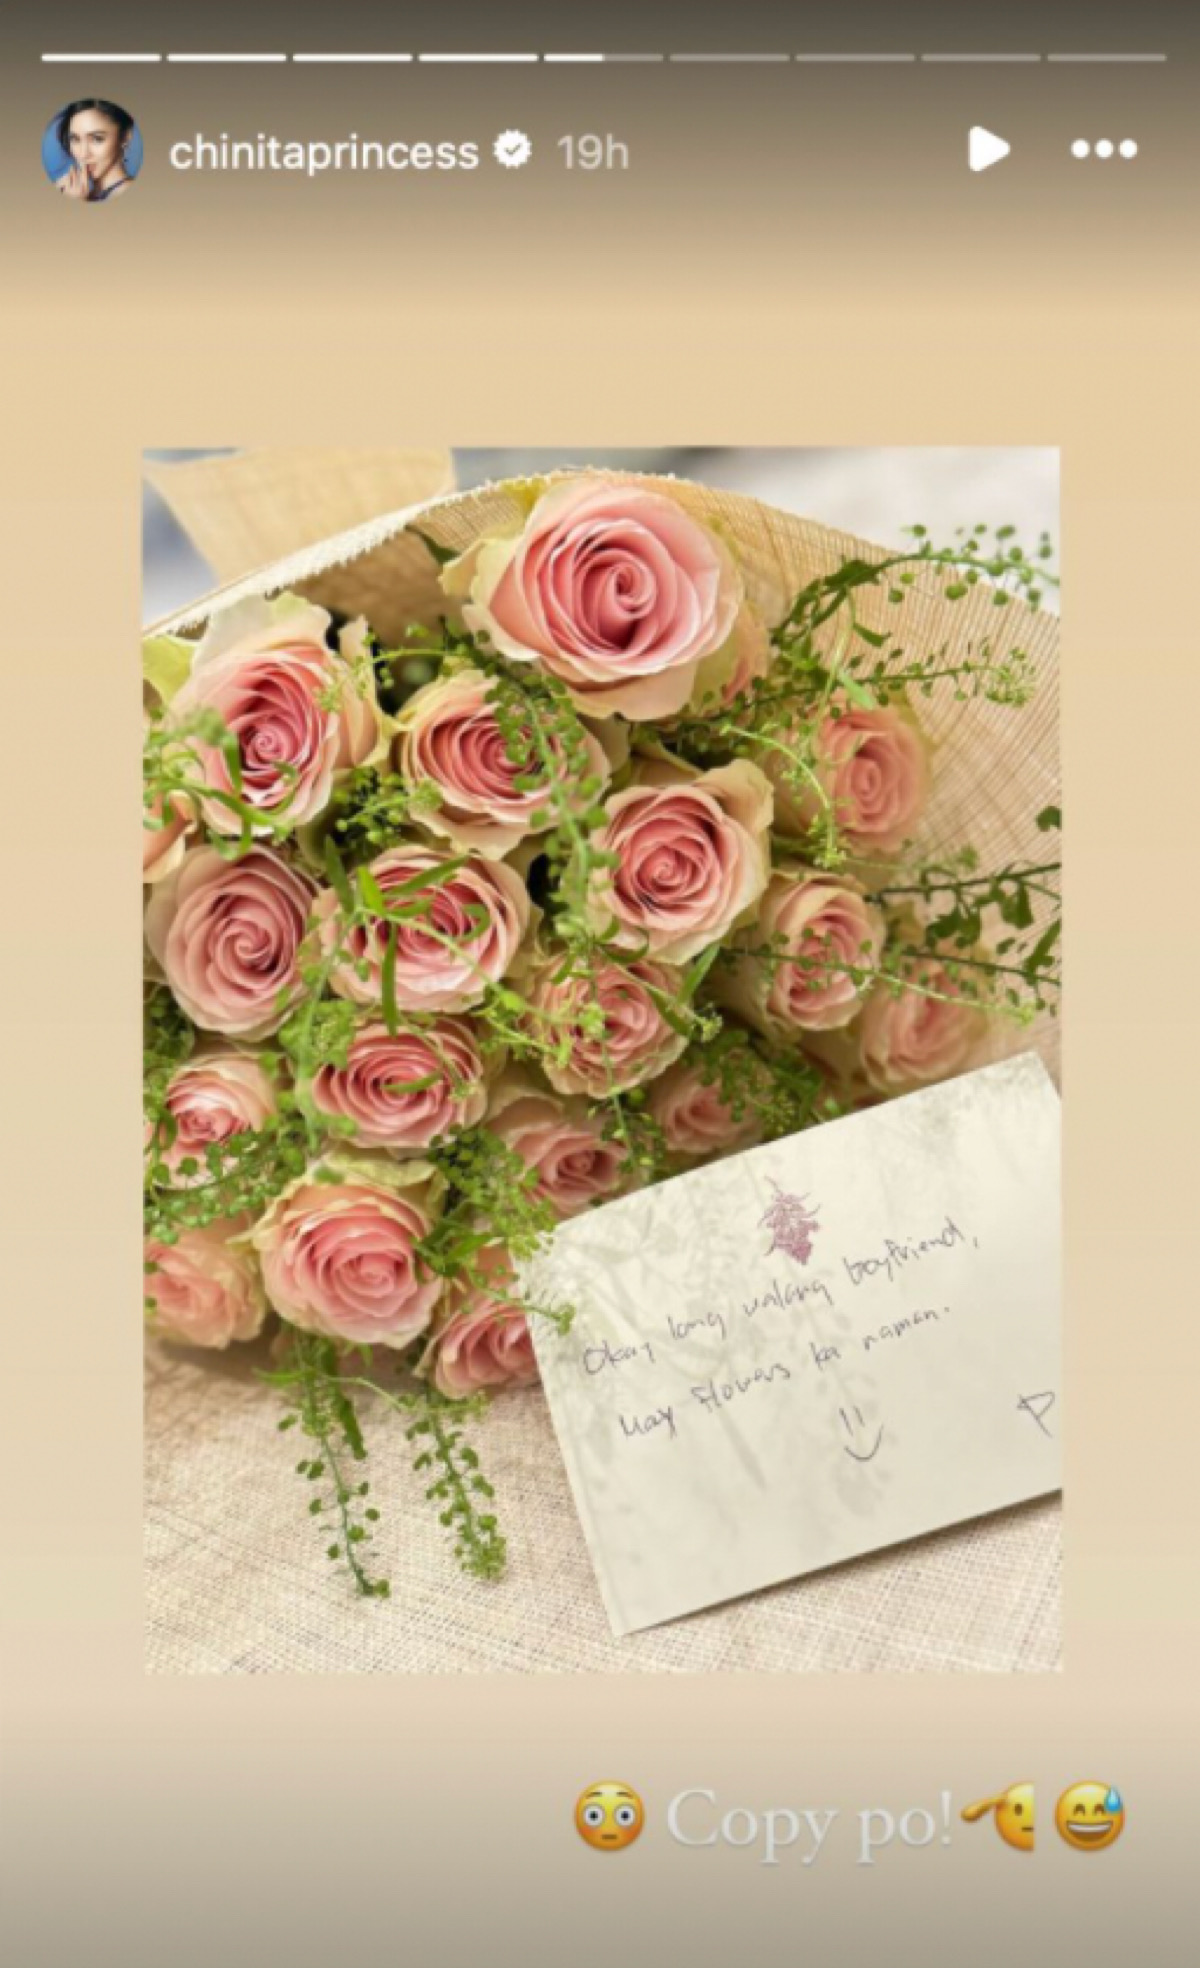 Kim Chiu gifted by mystery sender 'P' with flowers